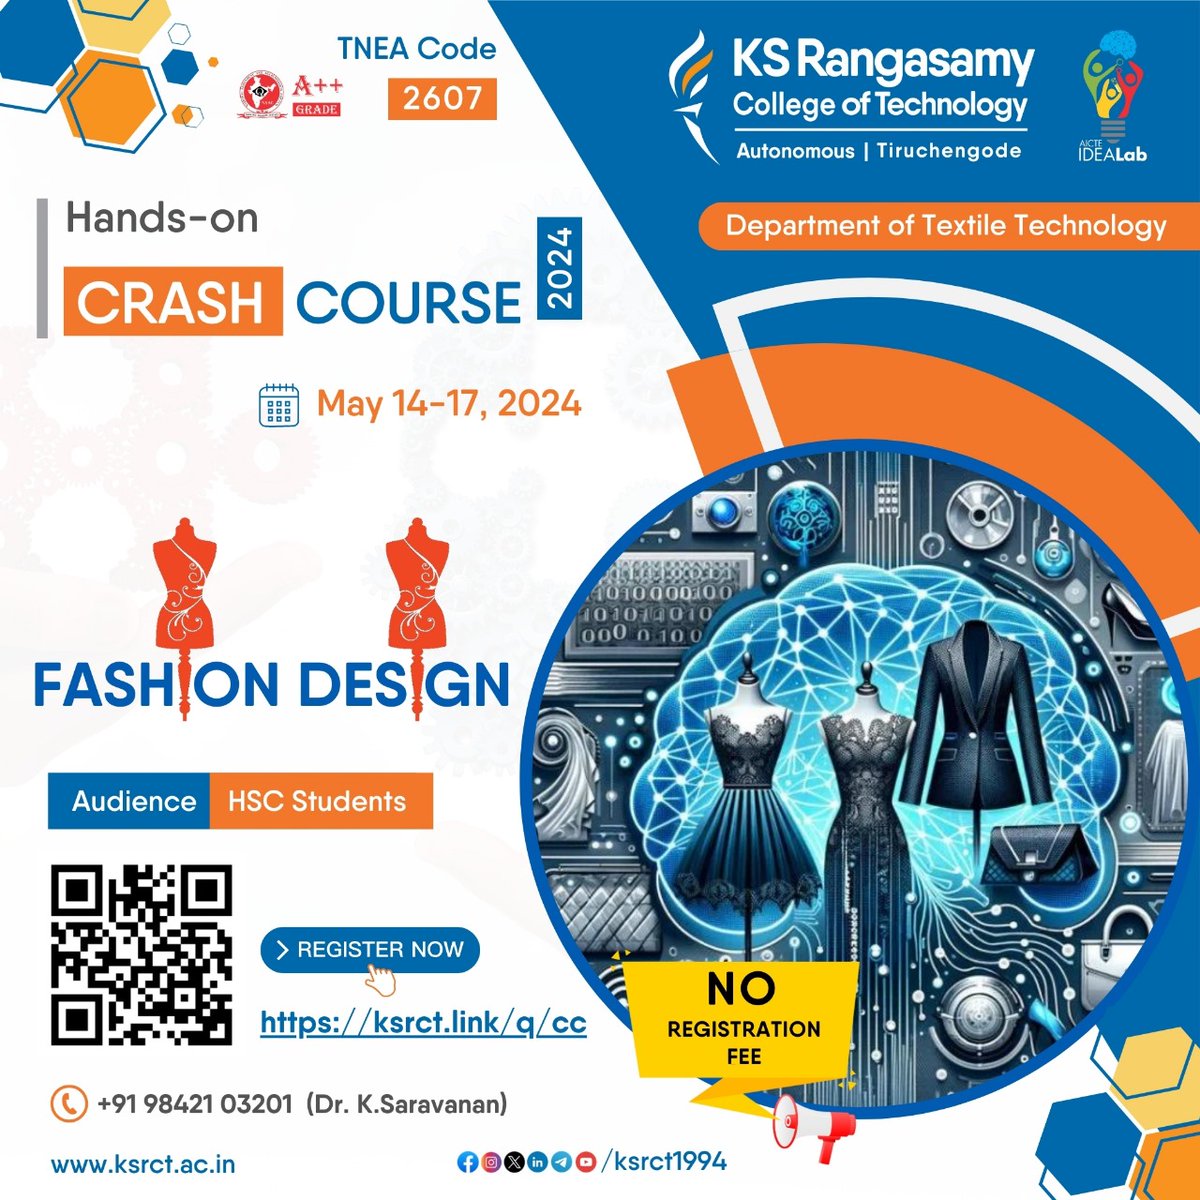 Fashion Design Crash Course ! K.S.Rangasamy College of Technology #ksrct1994 Department of Textile Technology organizes #CrashCourse on 'Fashion Design' for the HSC (2024 Passed Out) during May 14 - 17, 2024. Interested Students may Register on: ksrct.link/q/cc